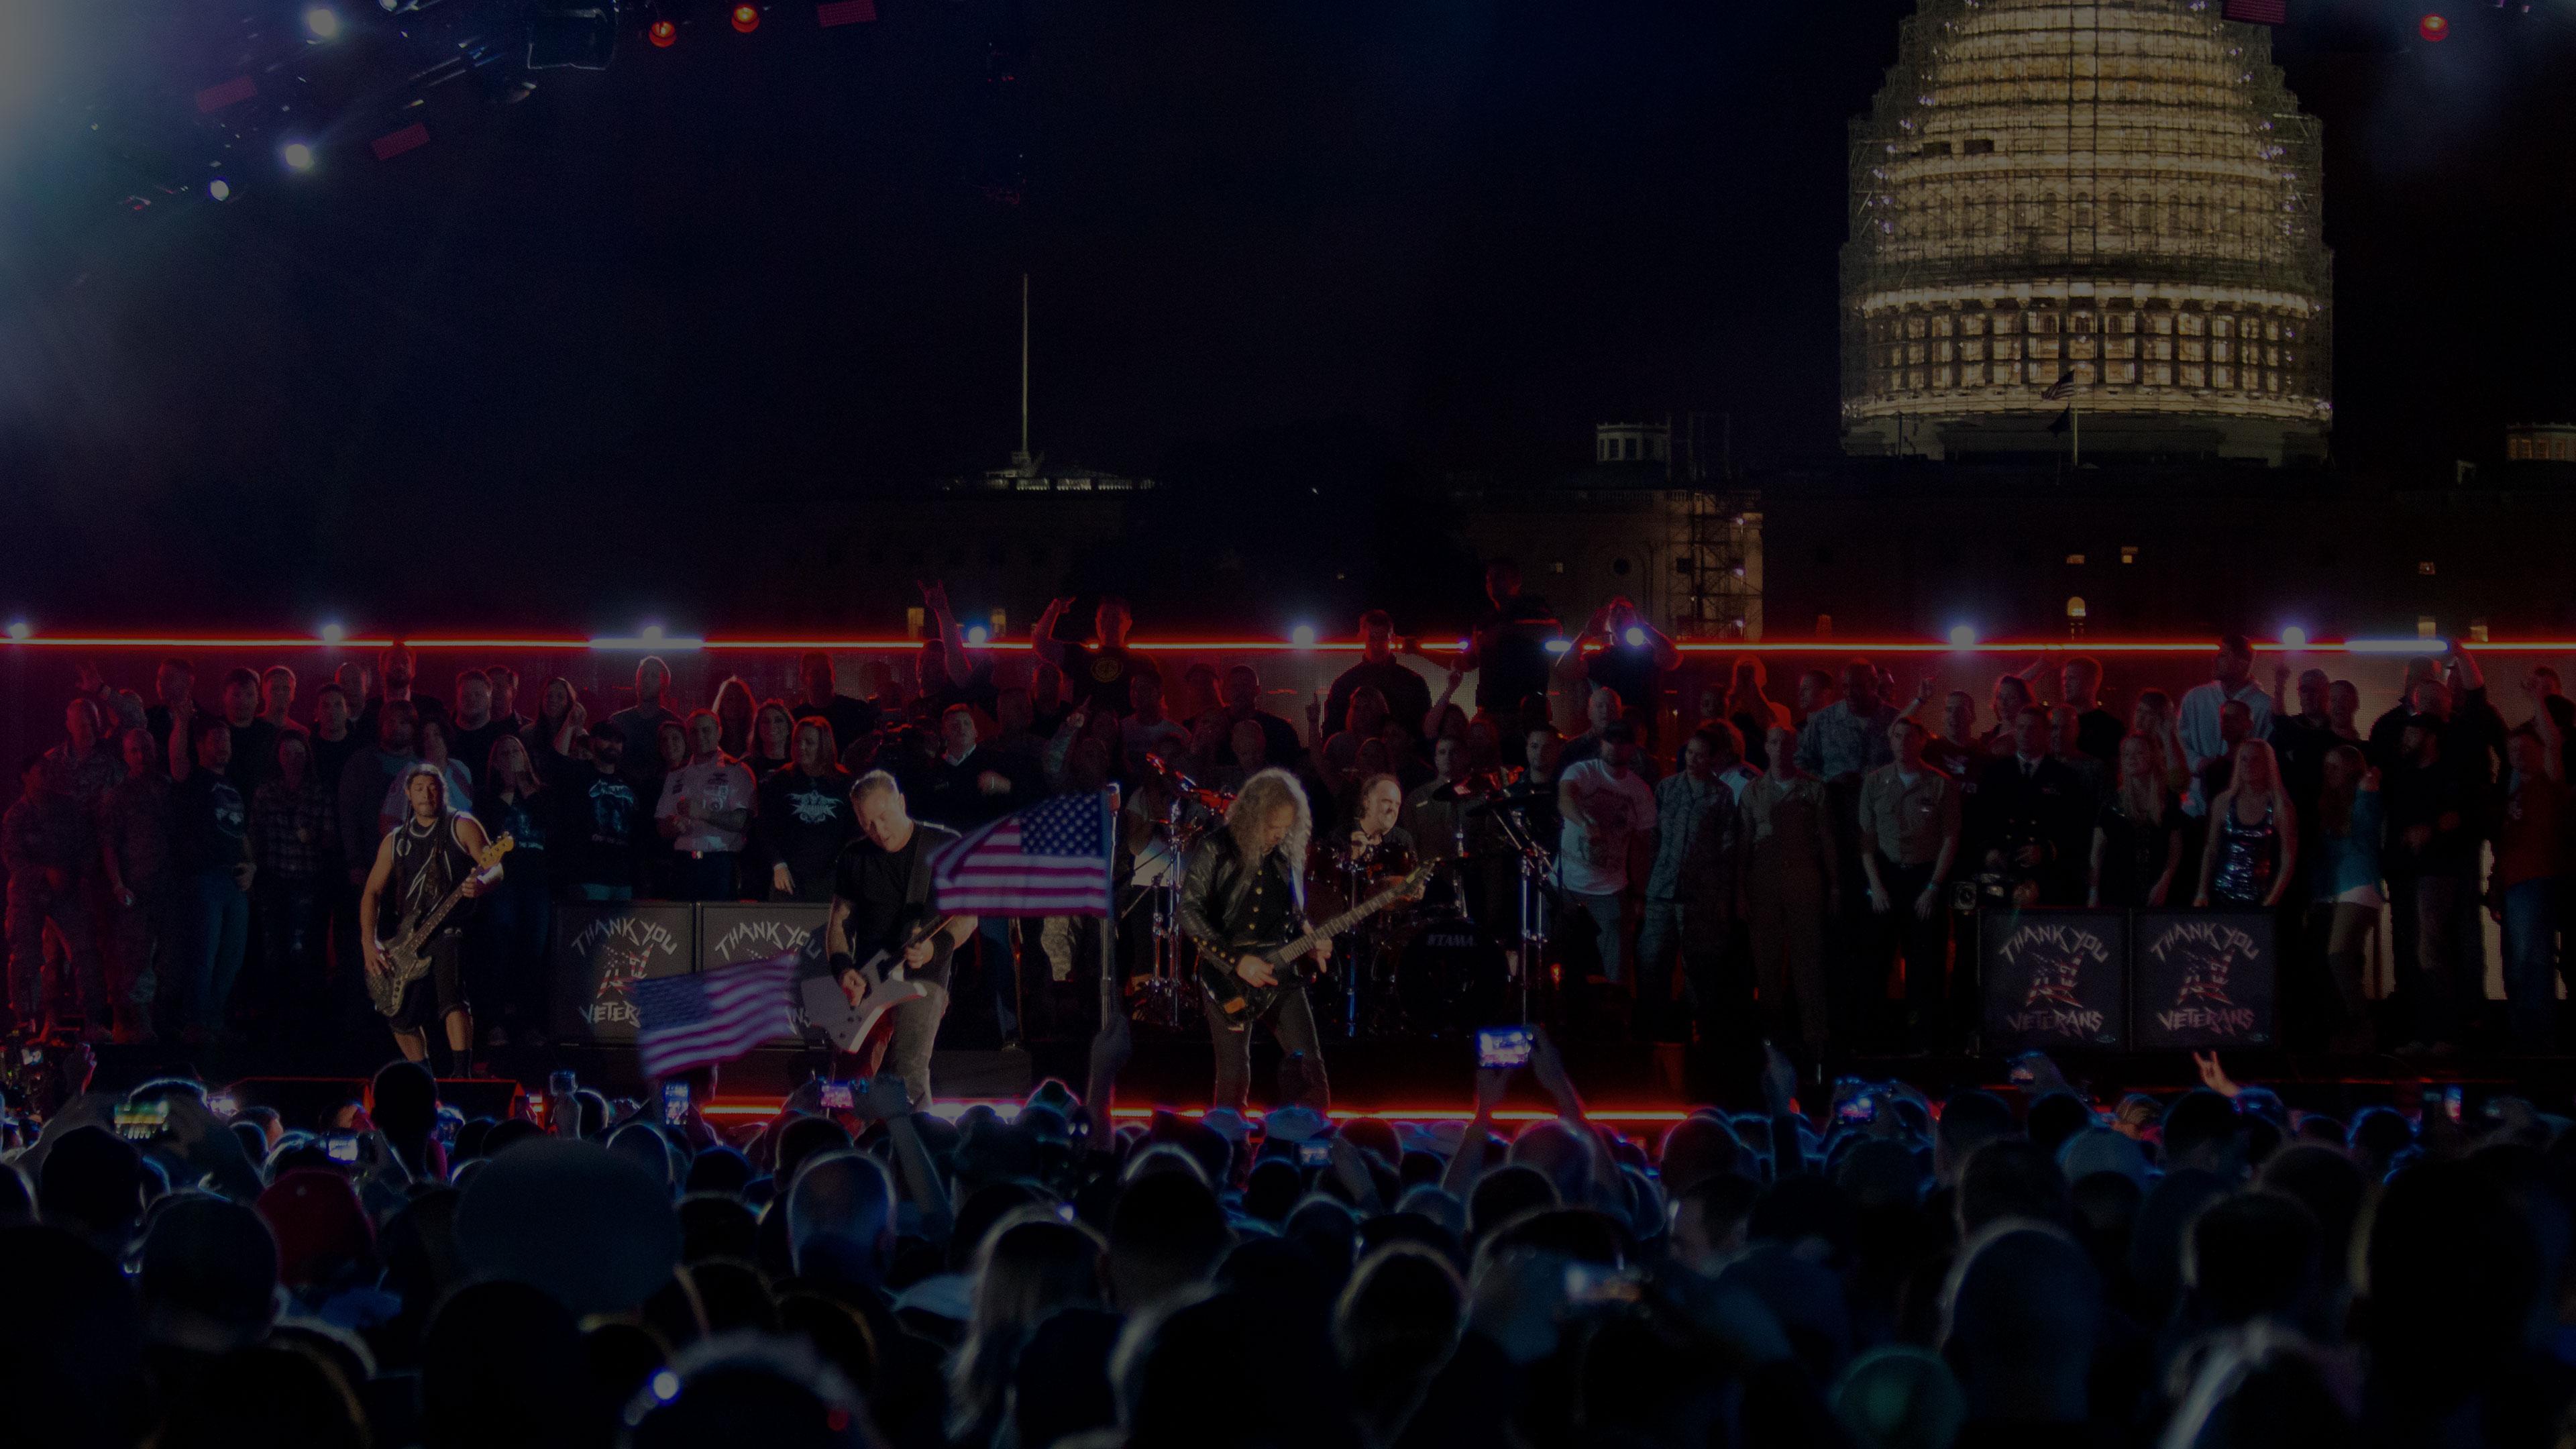 Metallica at The Concert For Valor at National Mall in Washington, DC on November 11, 2014